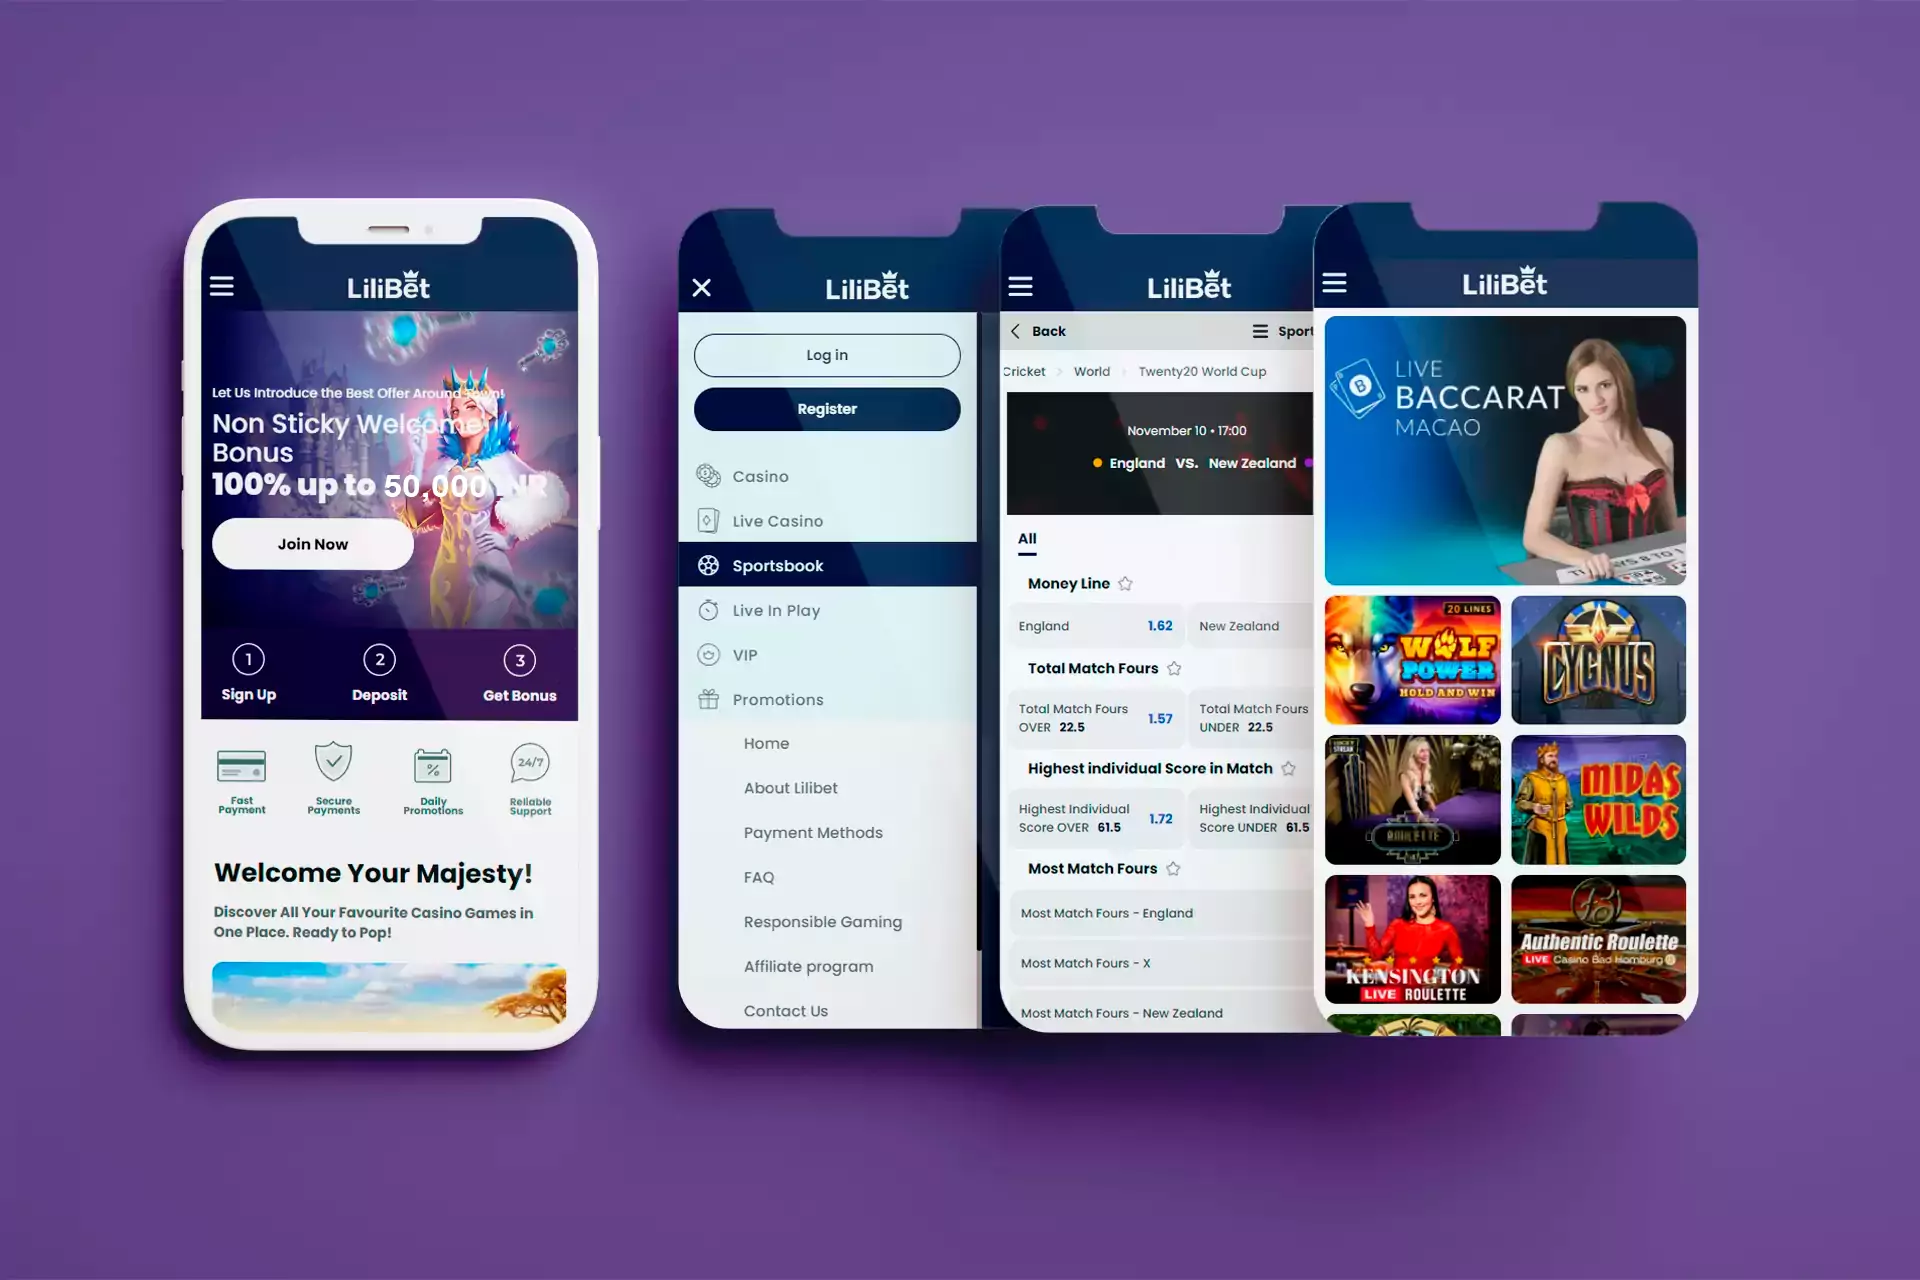 Despite the fact that Lilibet doesn't have an application yet, you can use a device for betting and playing casino games via the browser version.